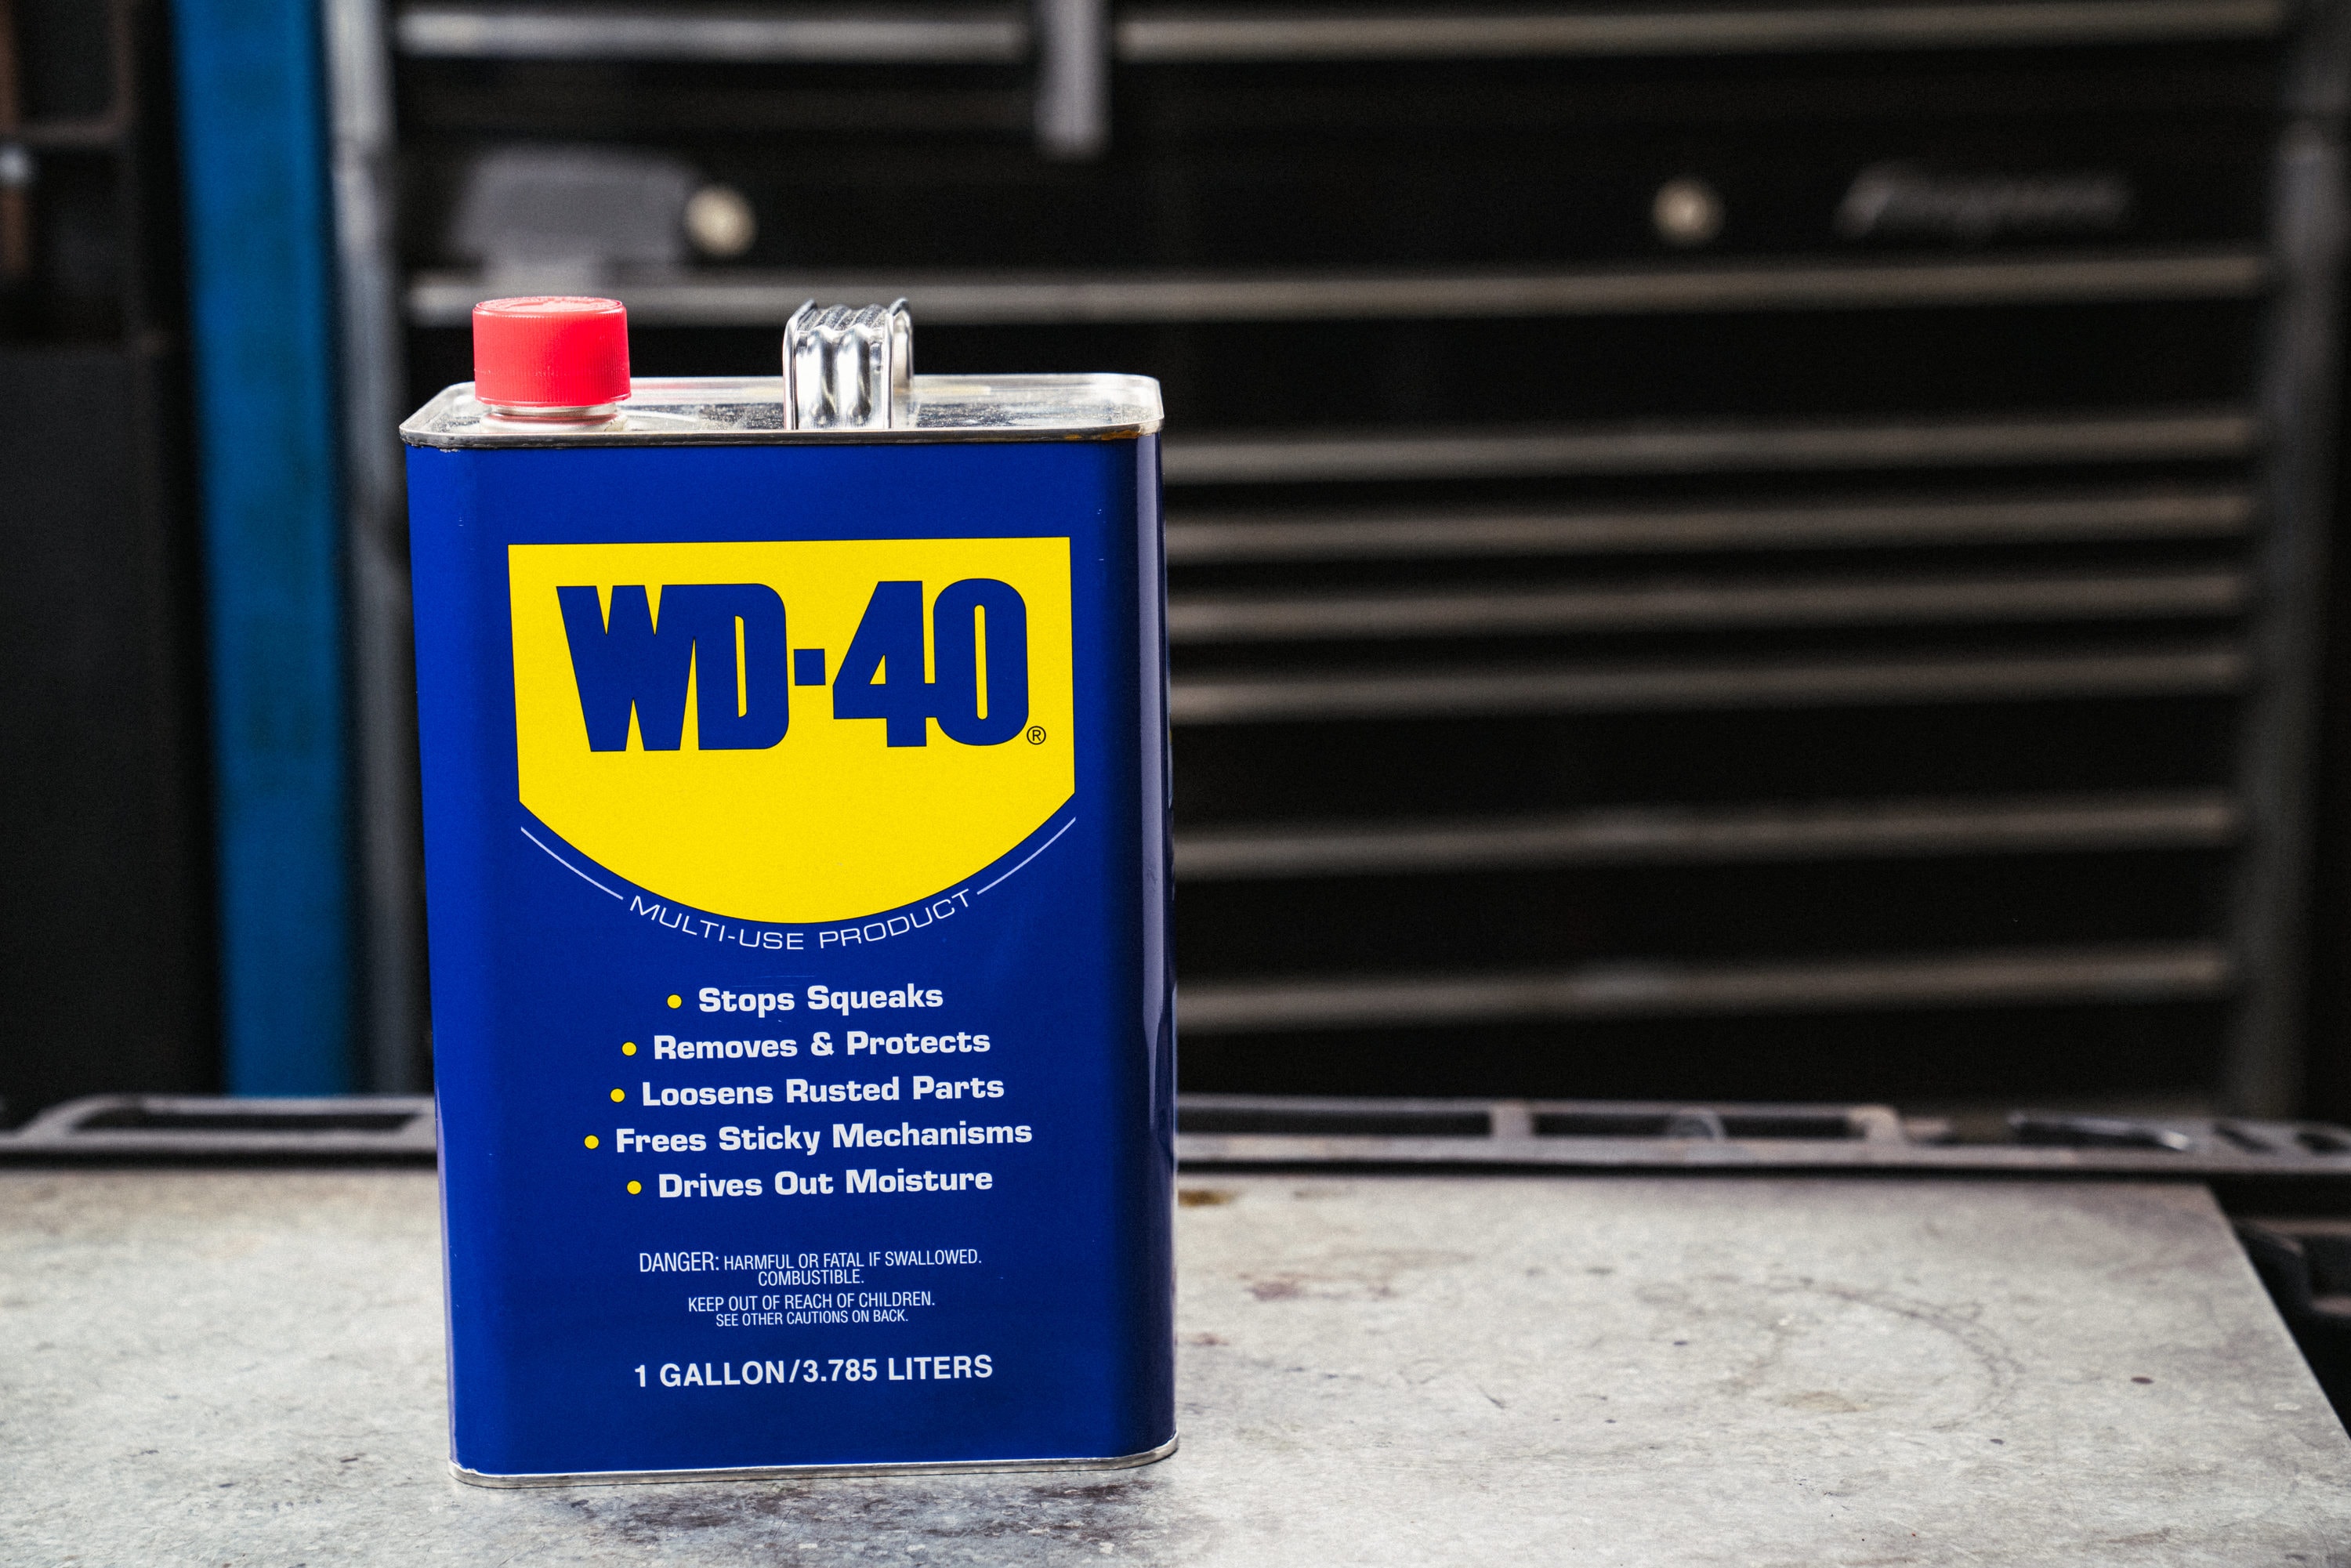 WD-40 Multi-Use Product, 3 OZ [6-Pack]